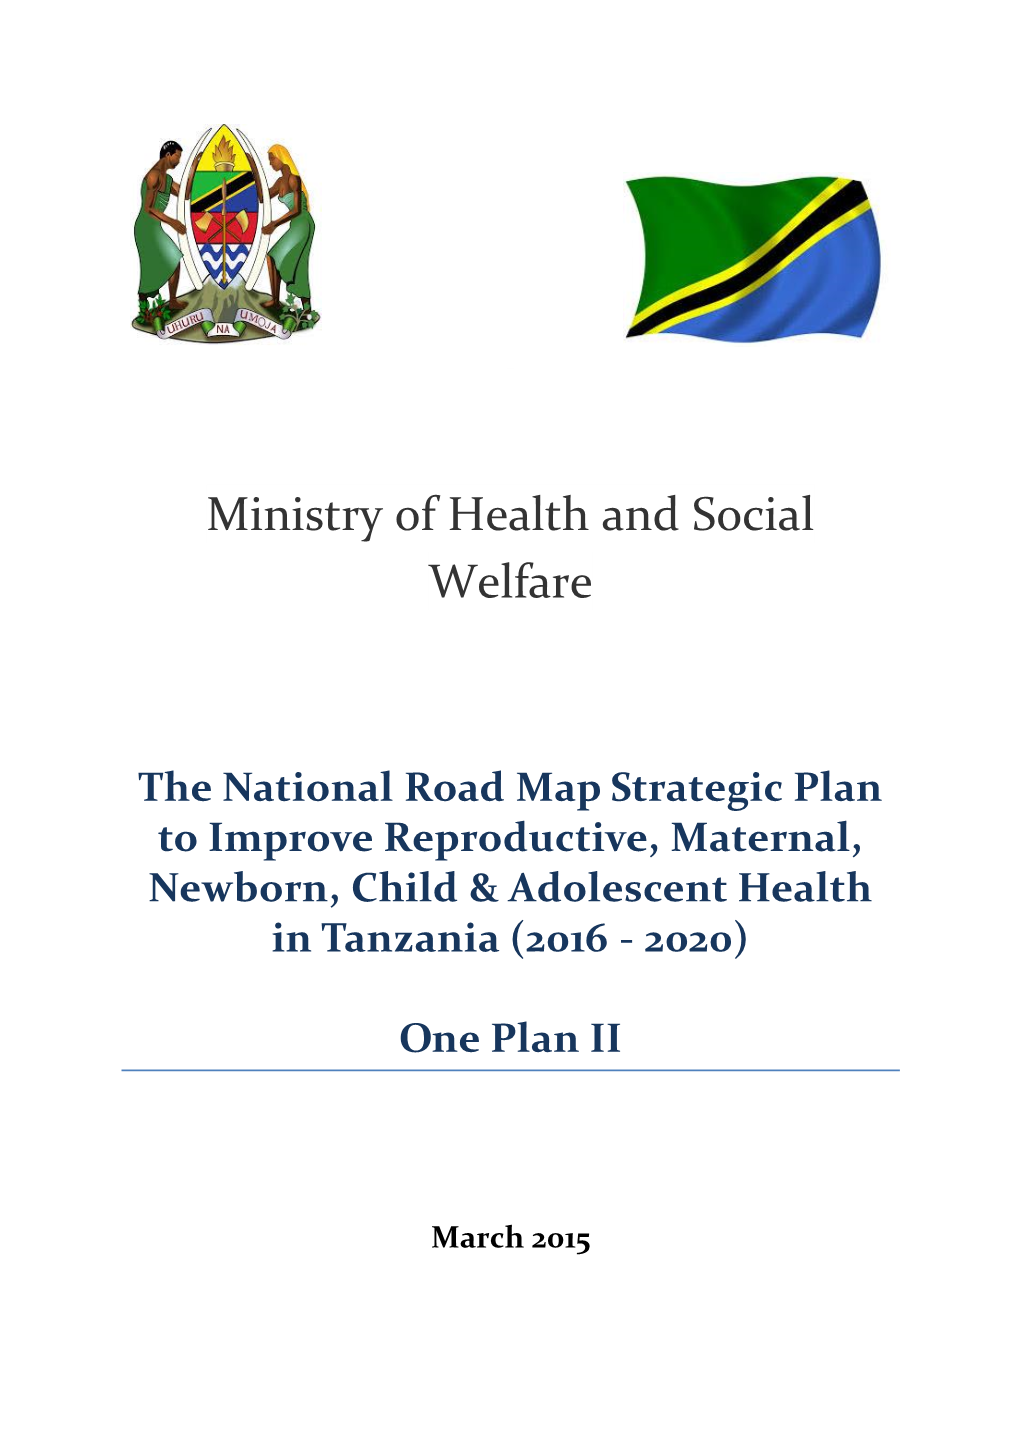 National Road Map Strategic Plan to Accelerate Reduction of Maternal, Newborn, and Child Deaths in Tanzania